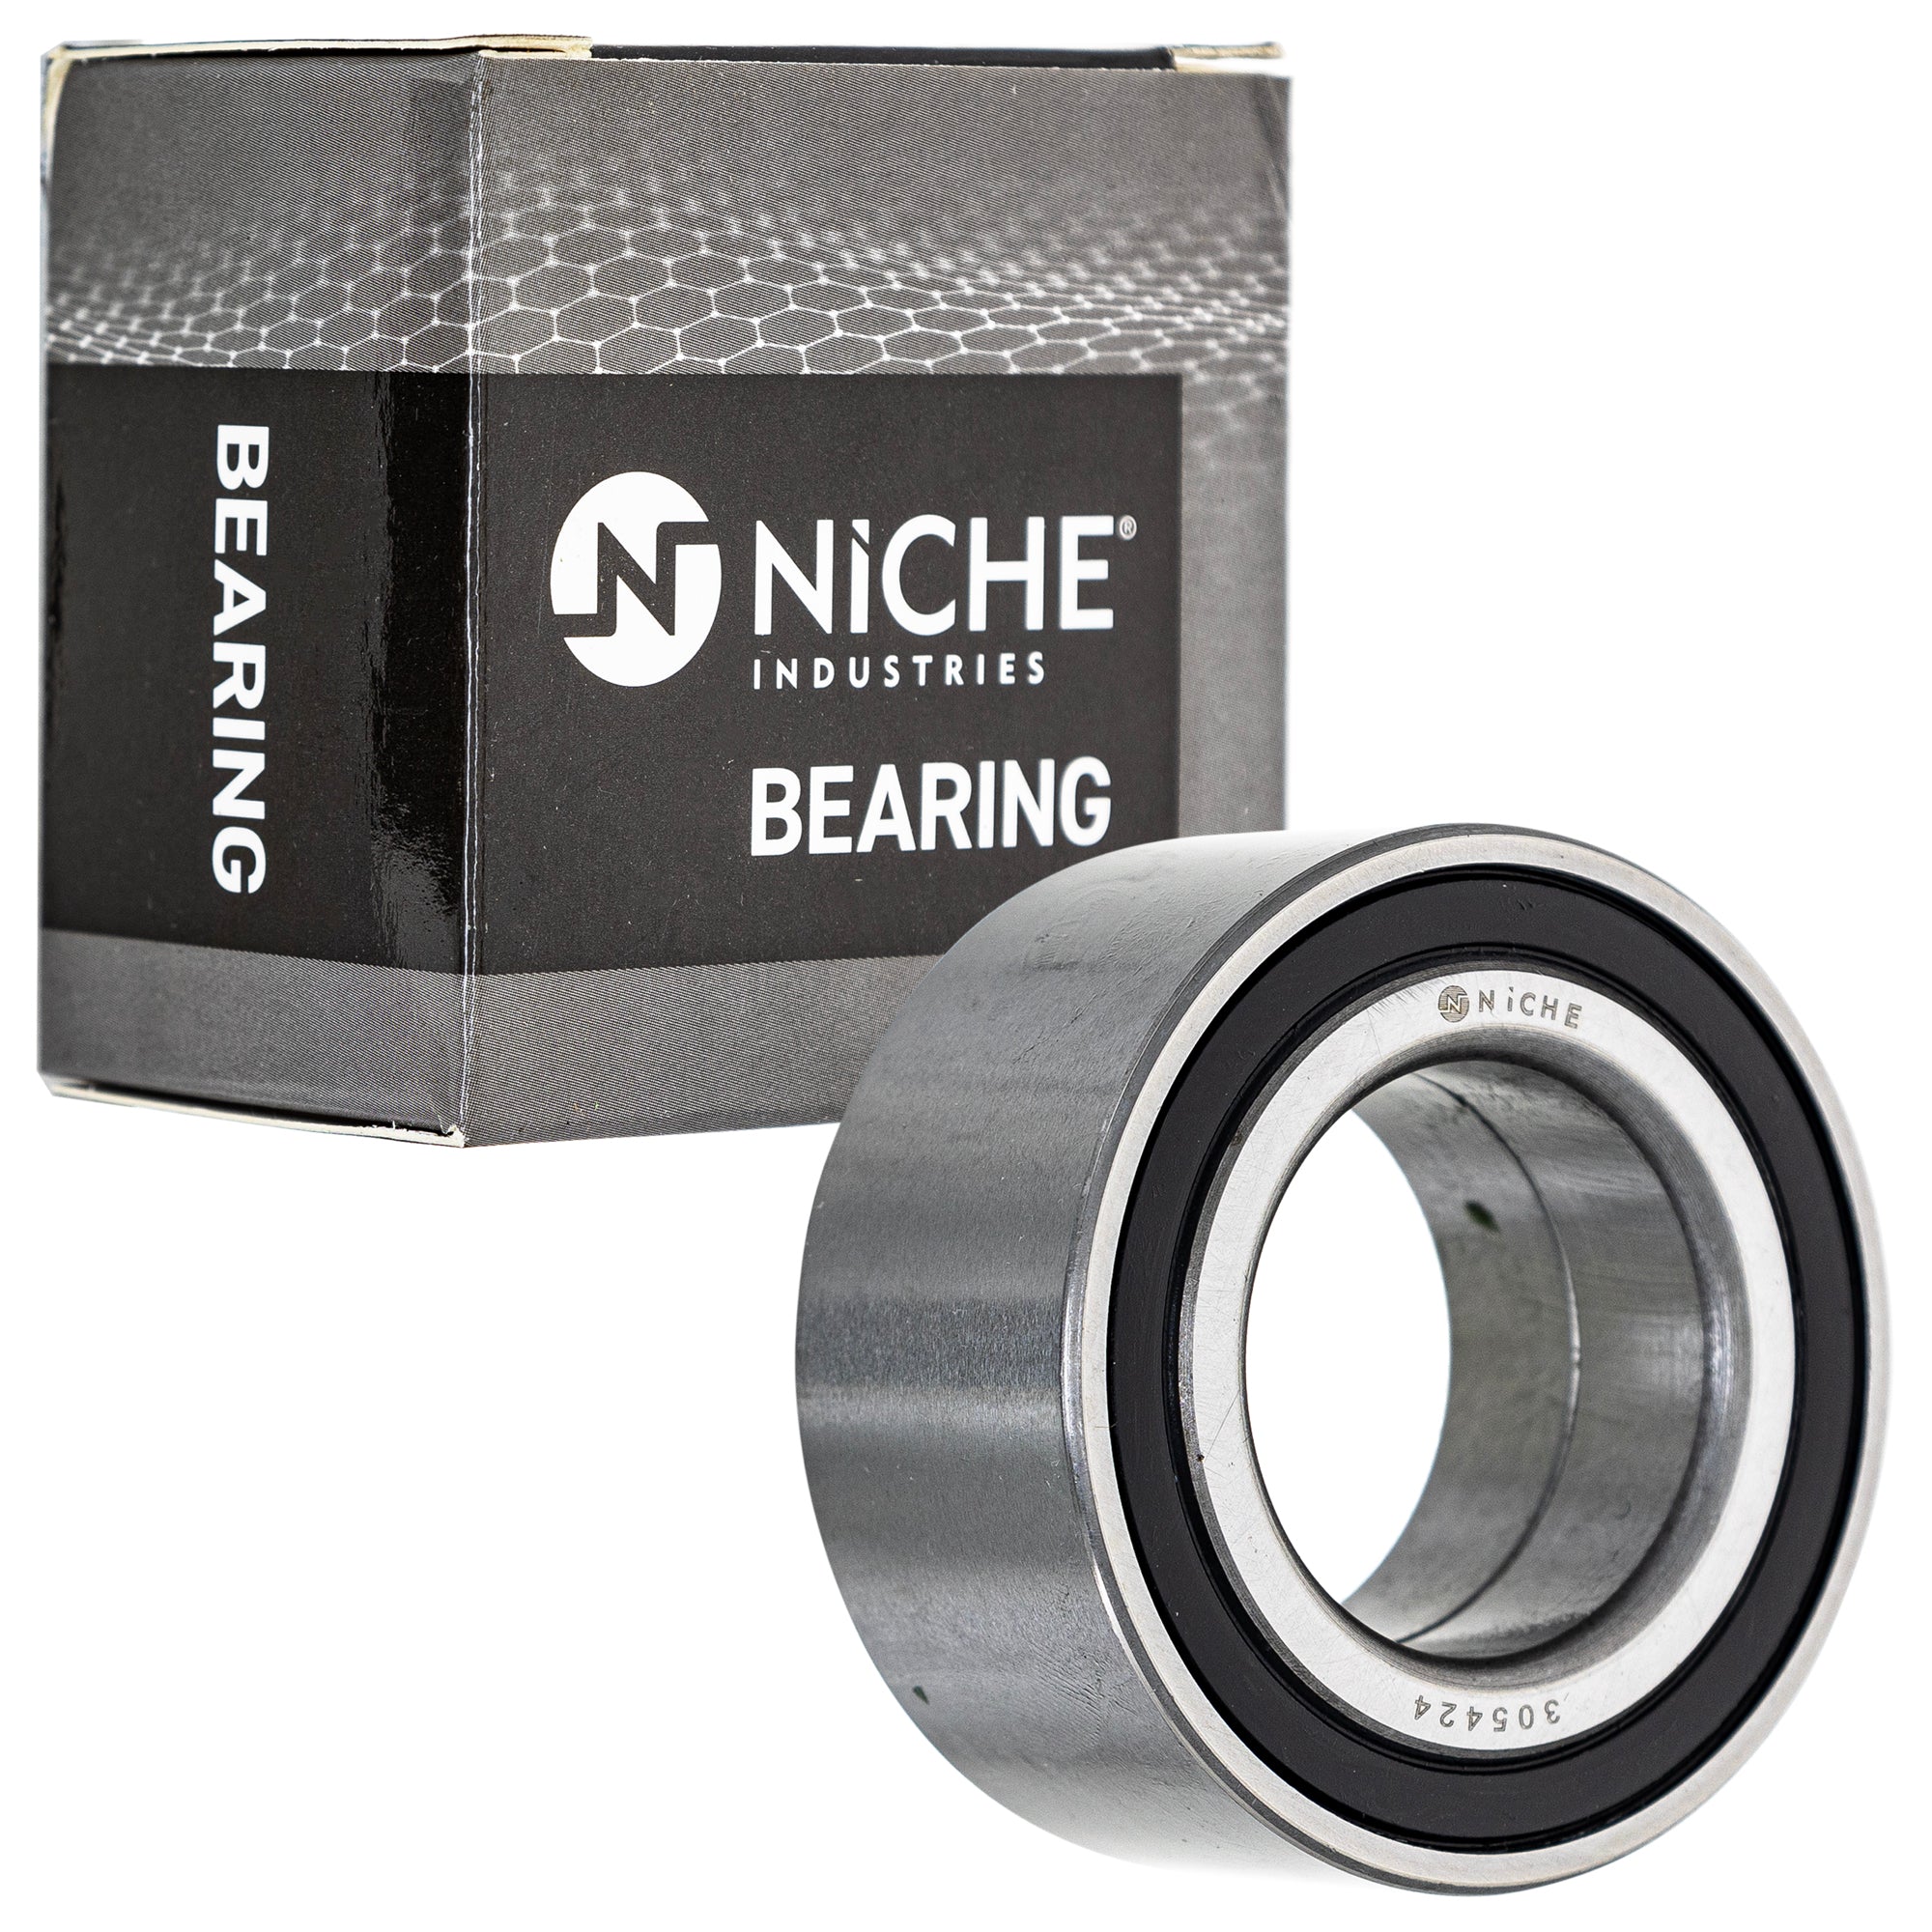 NICHE 519-CBB2255R Bearing & Seal Kit 10-Pack for zOTHER BRP Can-Am